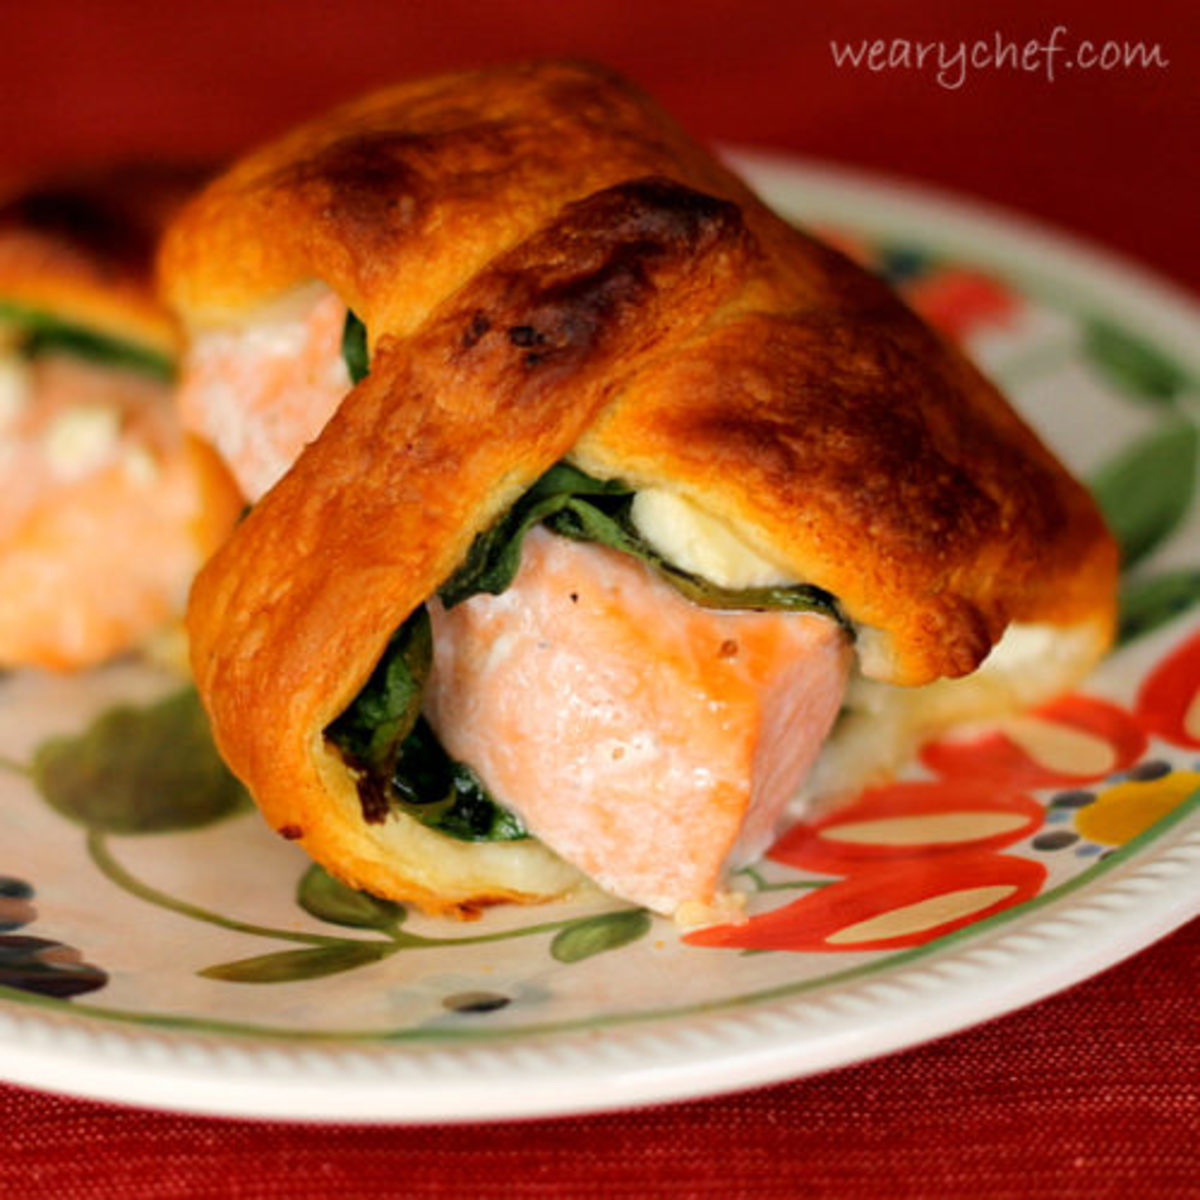  Salmon Crescent Rolls with Spinach and Feta | The Weary Chef